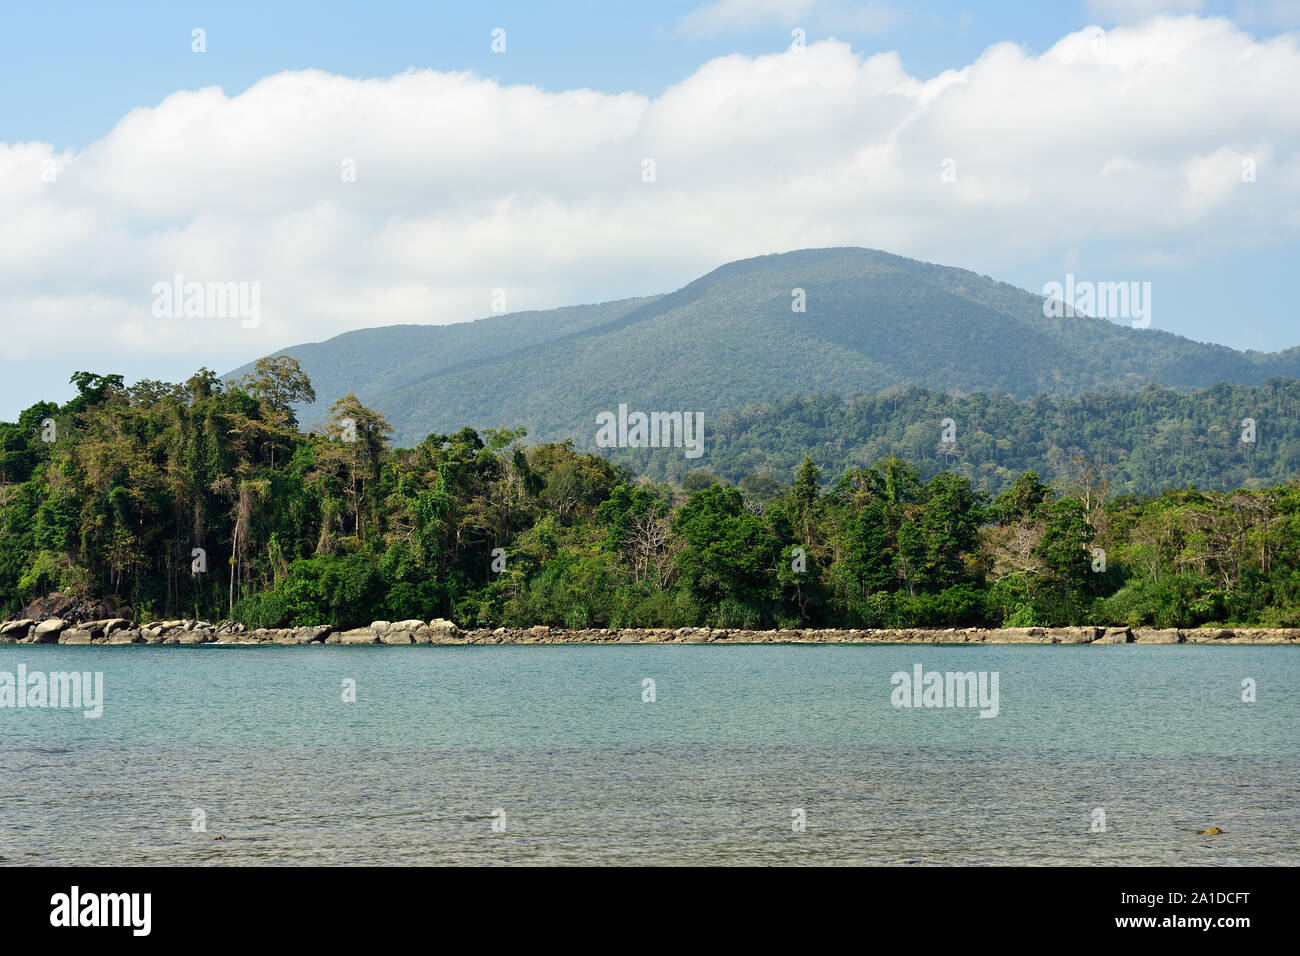 View on the Saddle peak and Kalipur Beach of the Andaman and Nicobar Islands, India Stock Photo